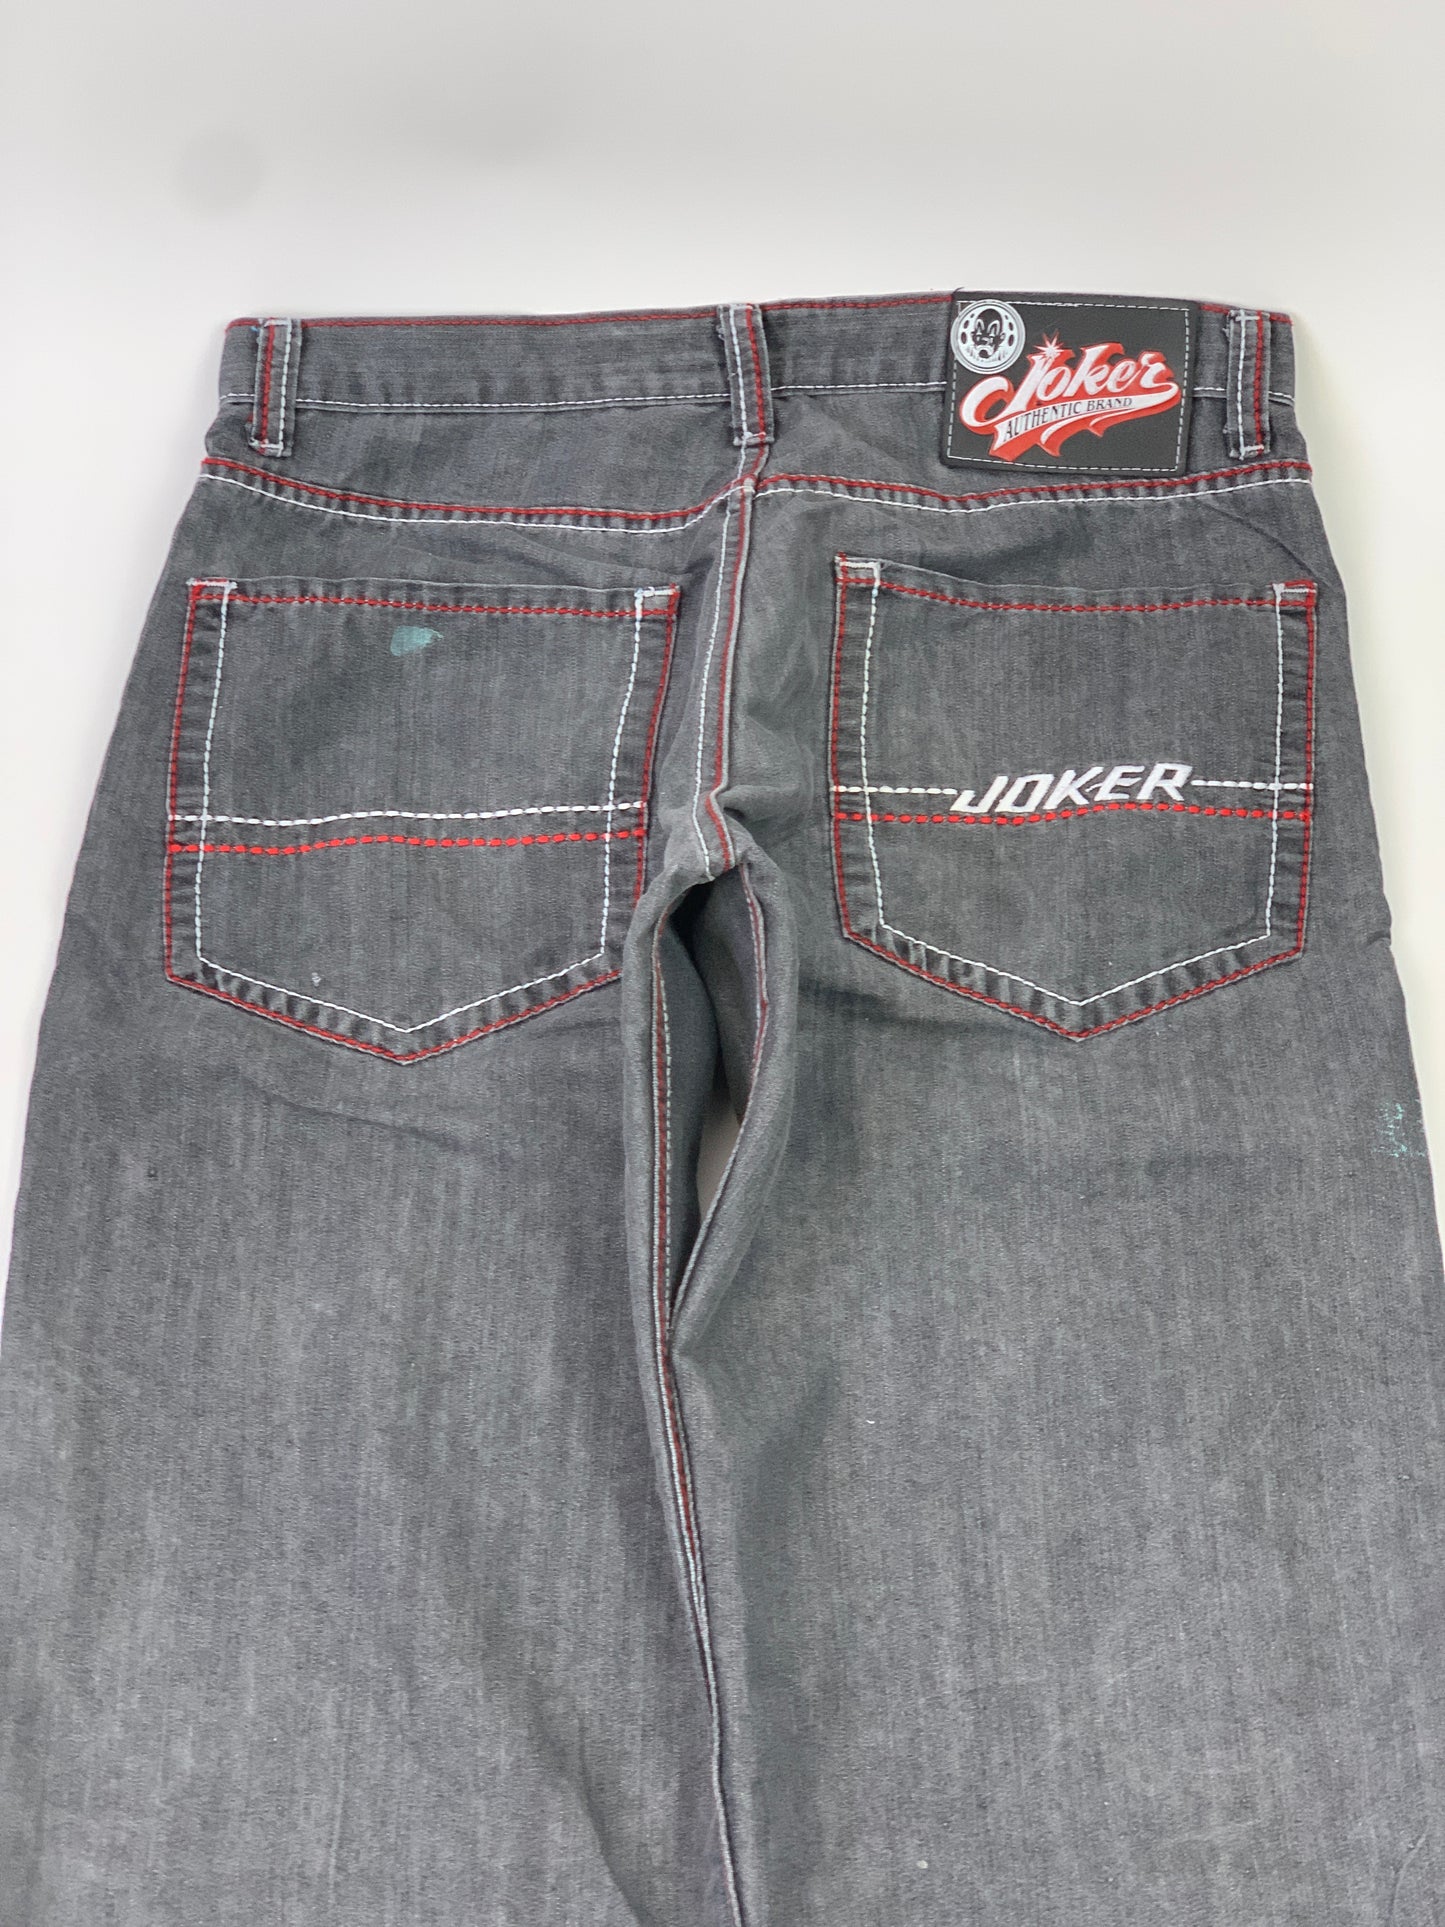 Joker Classic Embroidery Vintage Jeans - 32